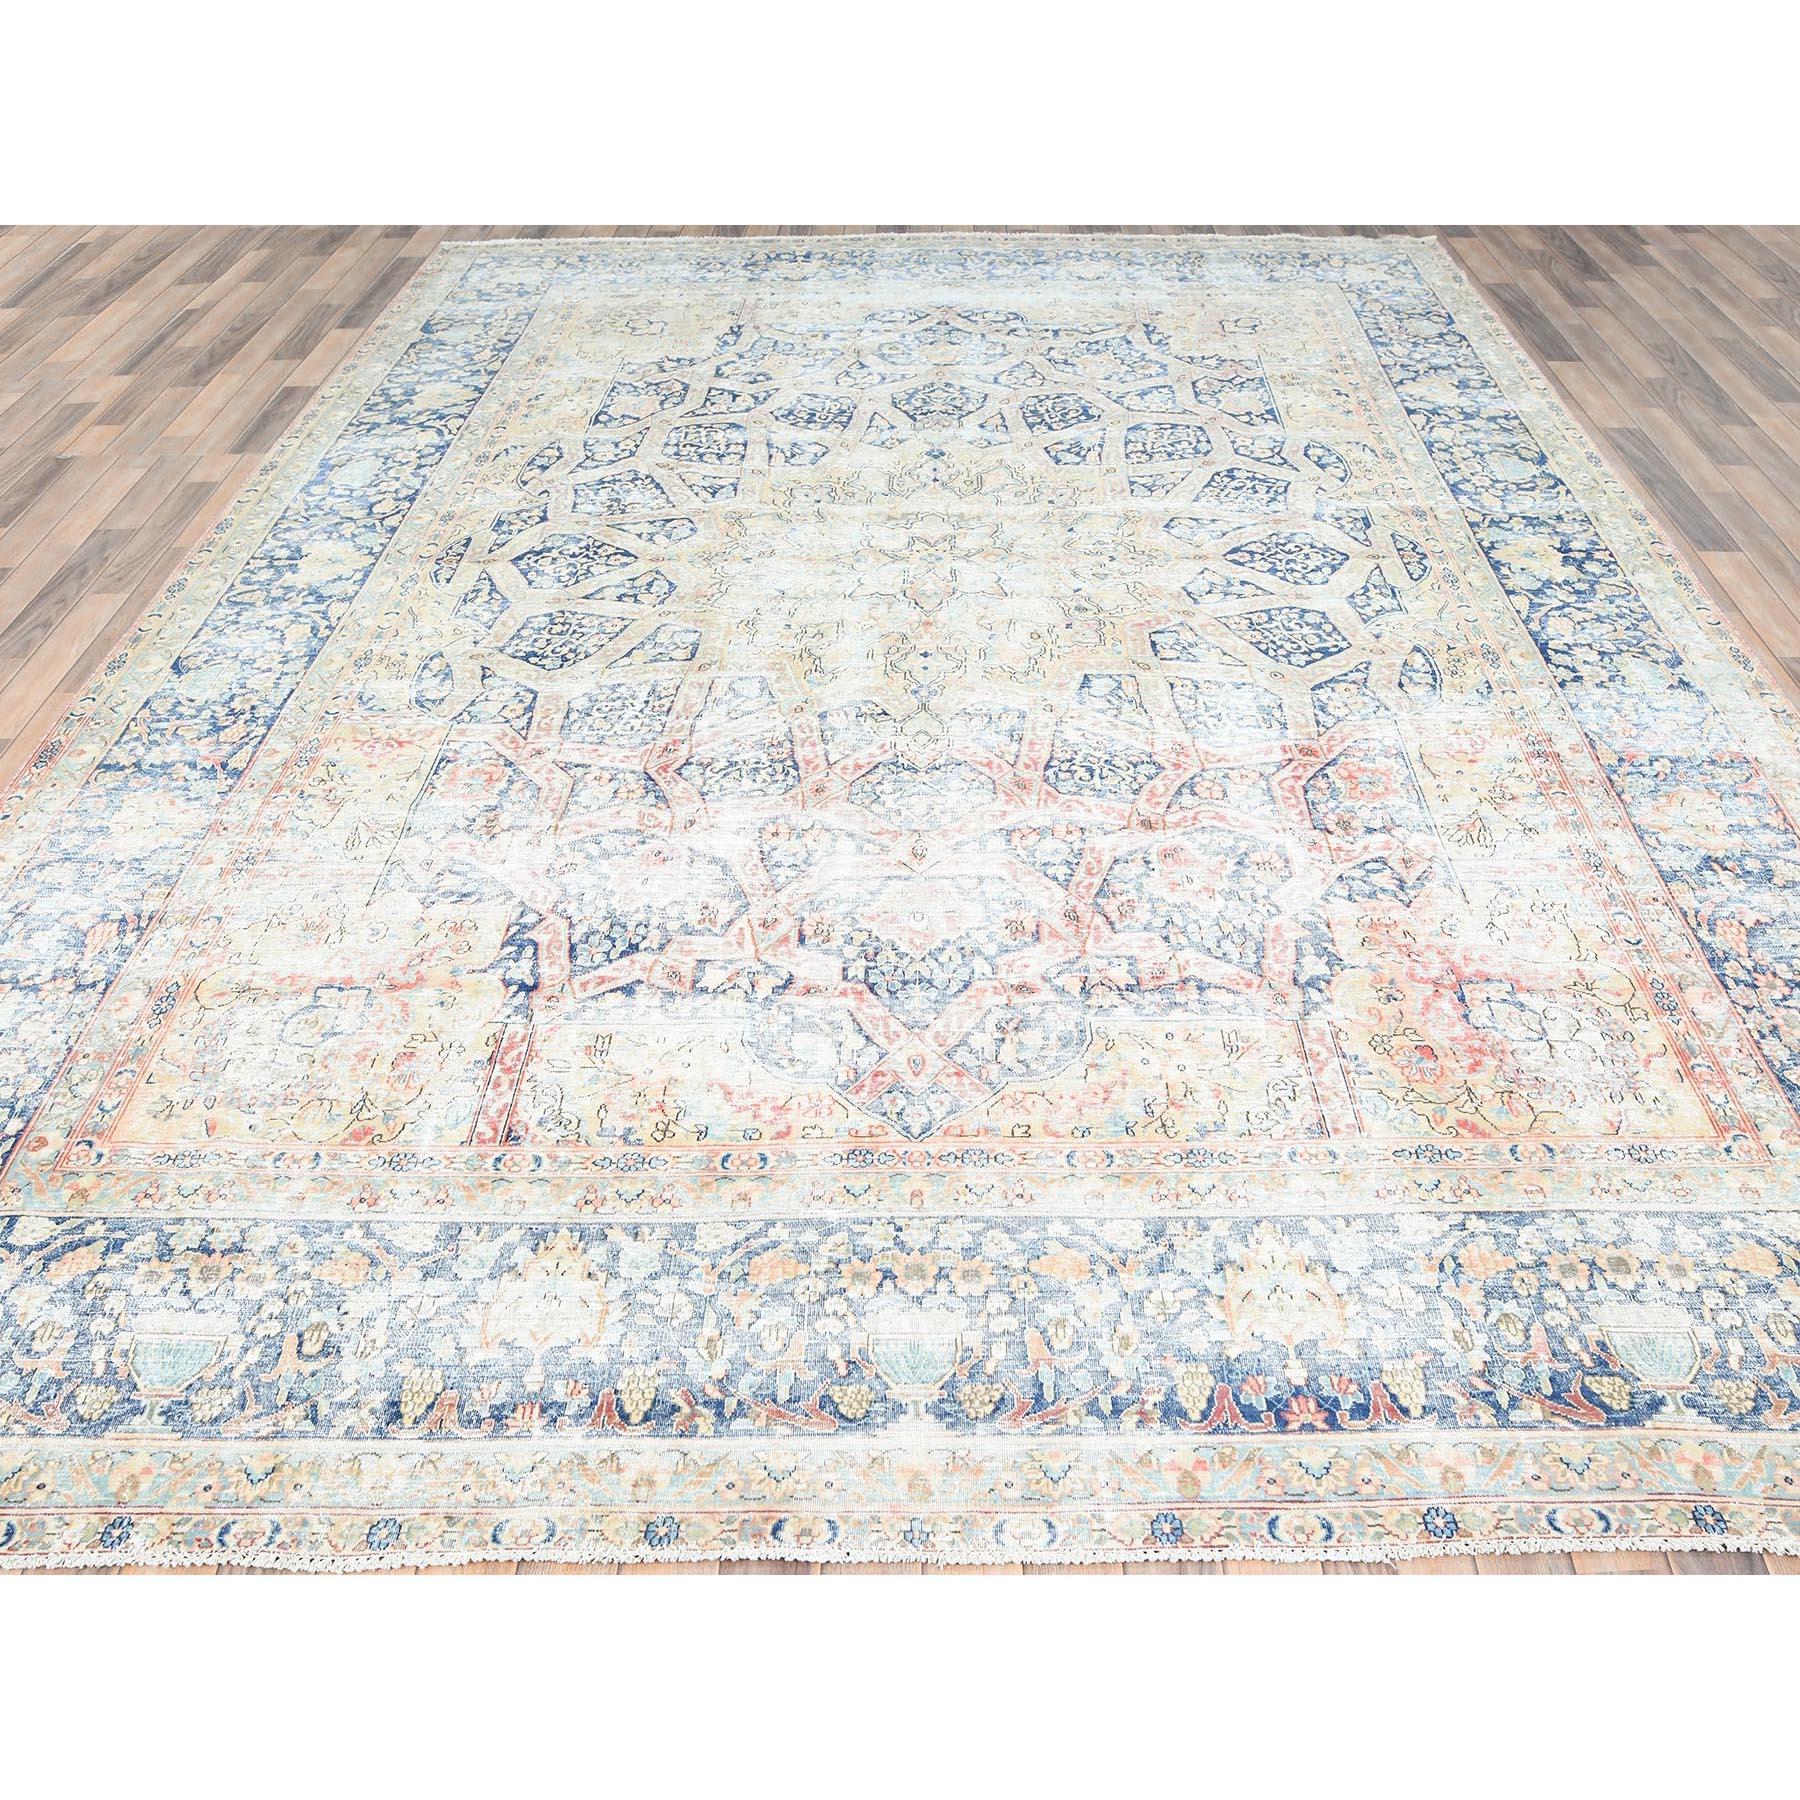 Medieval Ivory Vintage Persian Kerman Washed Out Hand Knotted Soft Wool Evenly Worn Rug For Sale